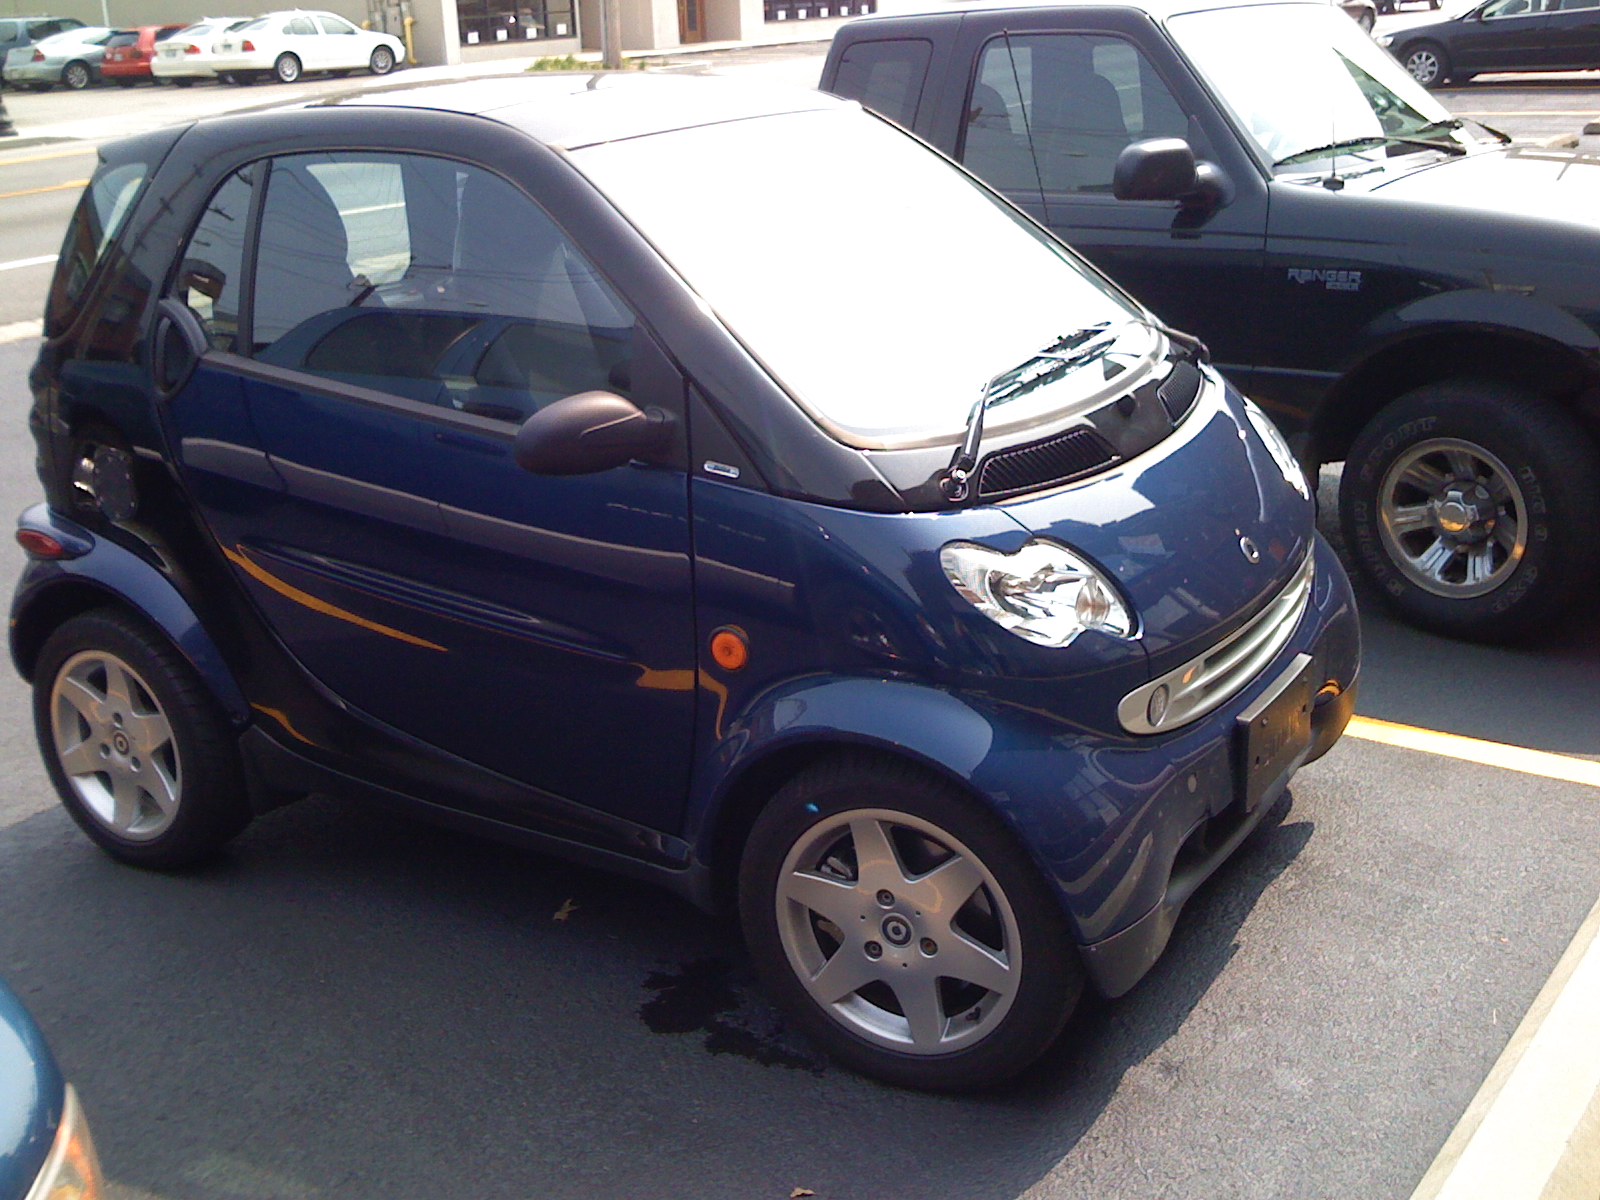 a small, compact blue car sits in the parking lot beside another small automobile